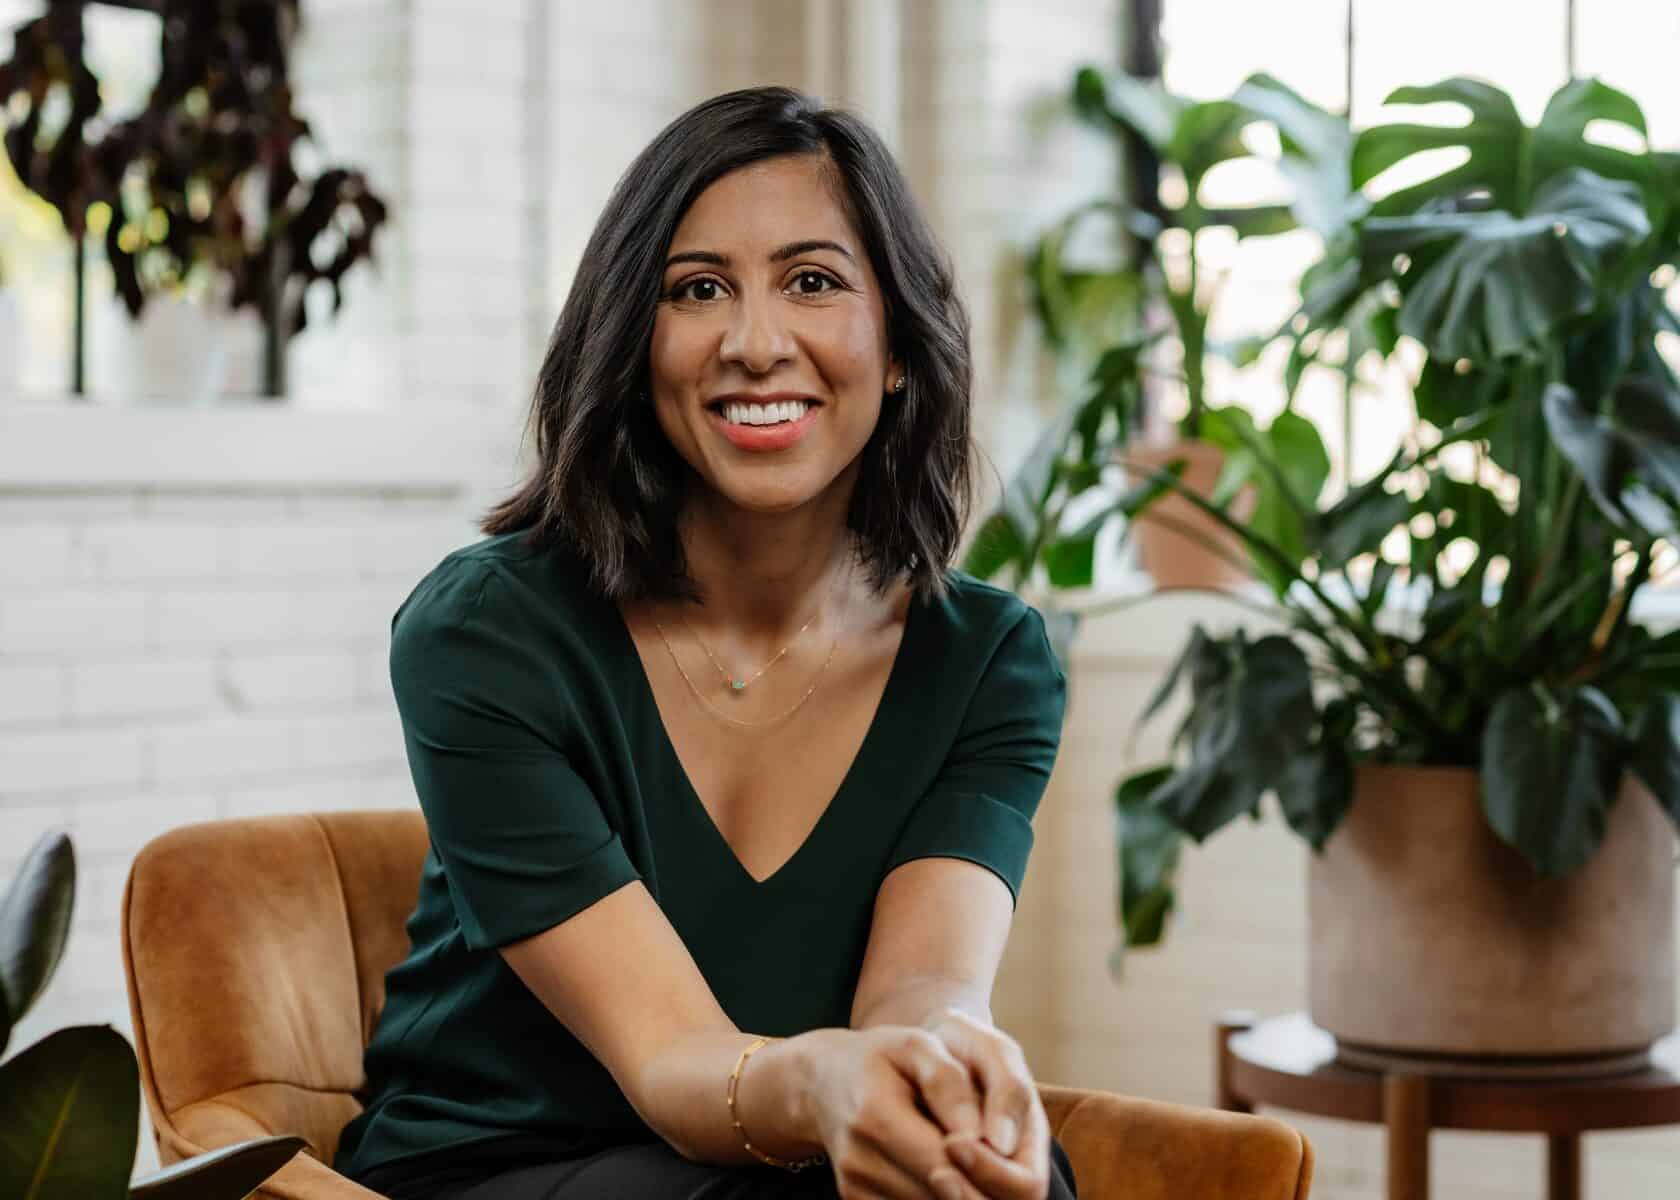 woman smiling and sitting on a brown chair with plants in the background